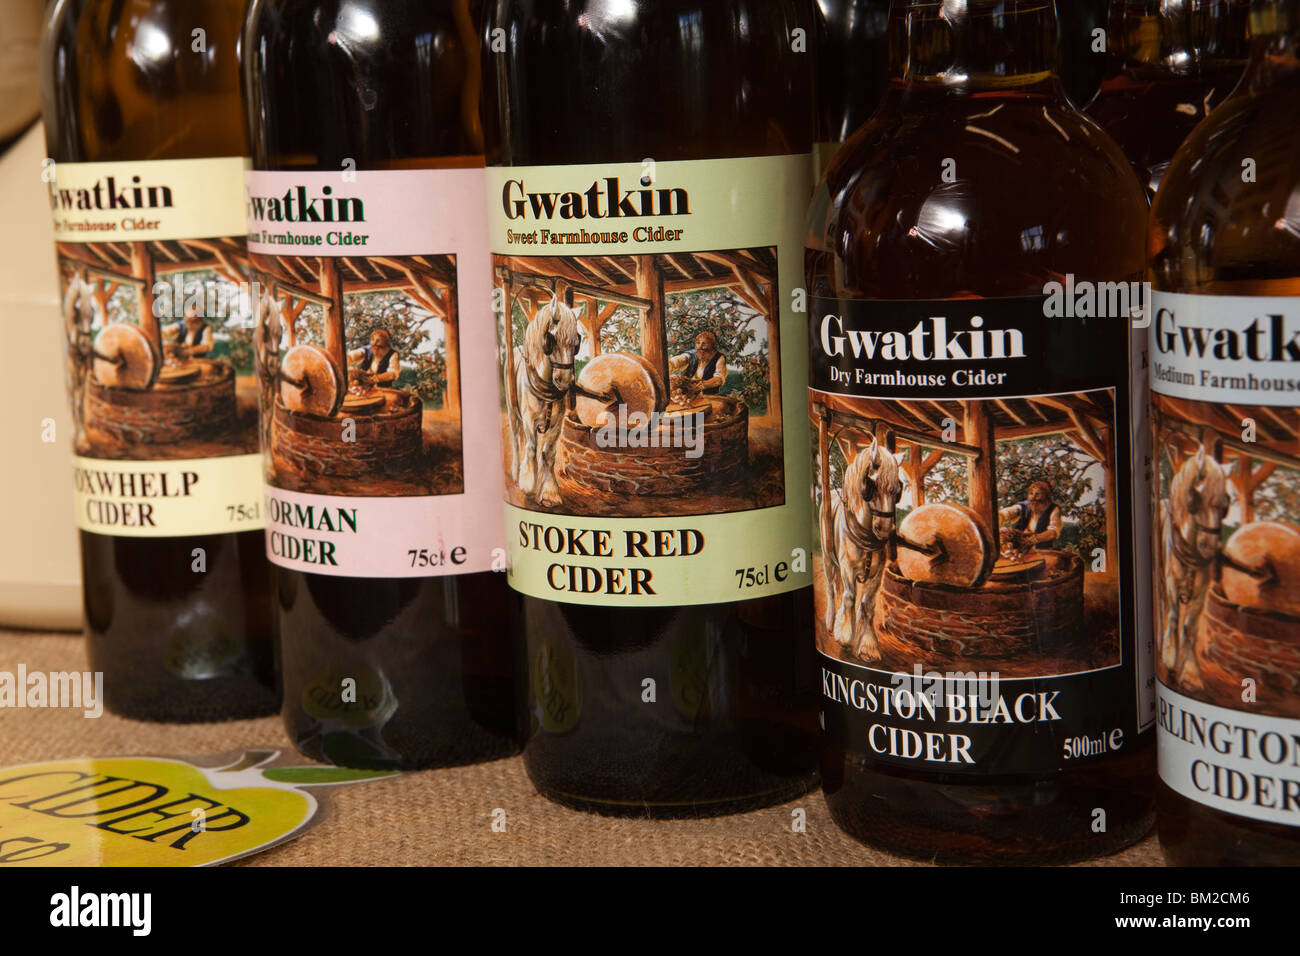 UK, England, Herefordshire, Putley, Big Apple Event, Gwatkin farmhouse cider products, bottles of craft ciders Stock Photo